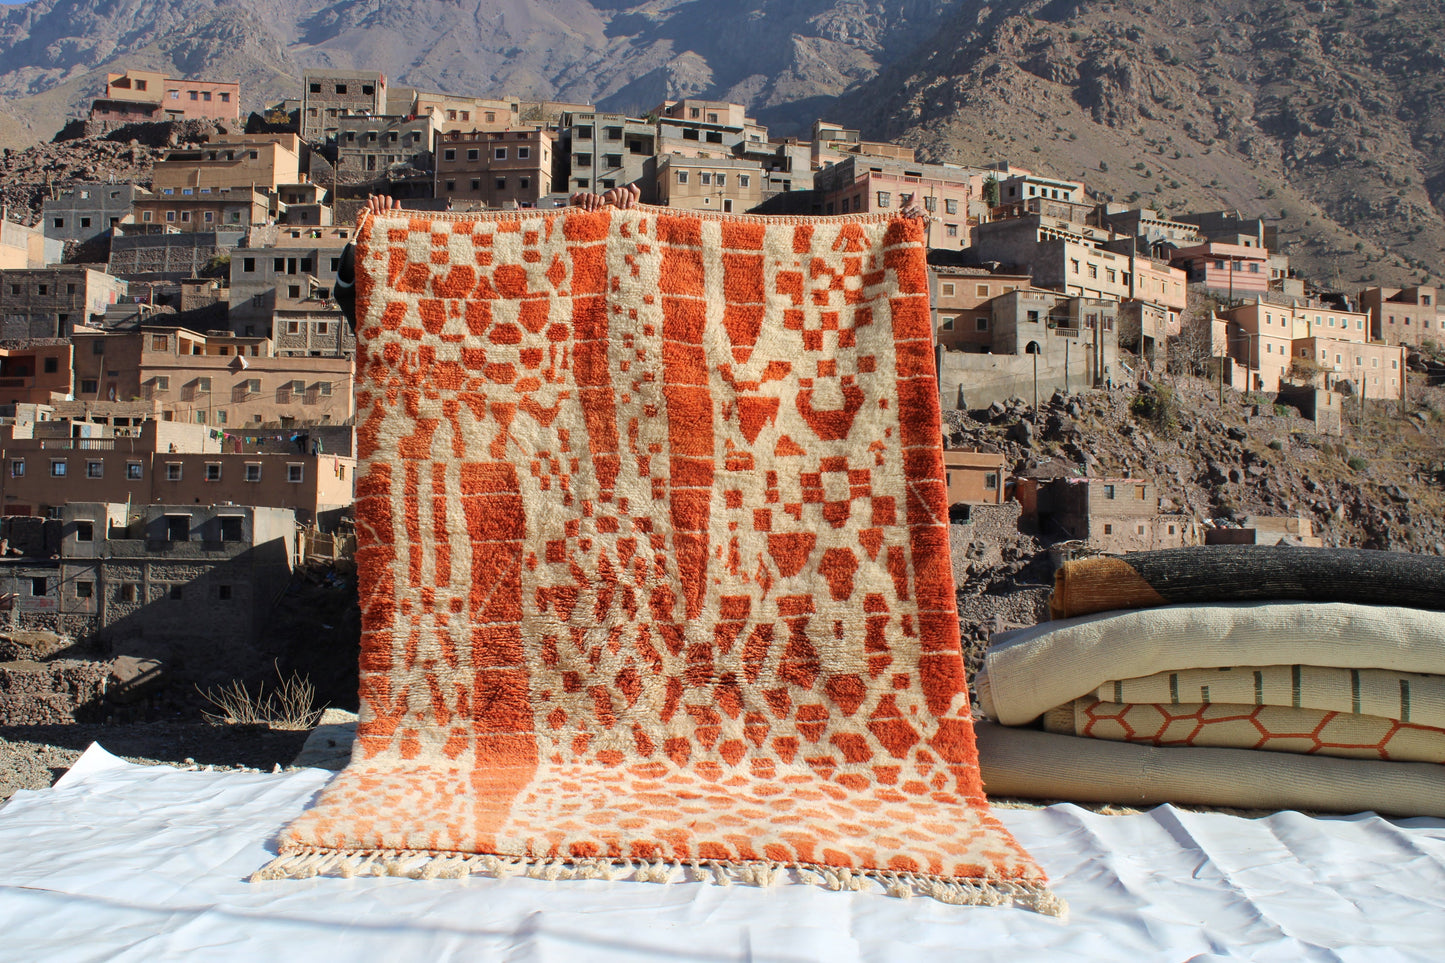 Beni Ourain rugs originate from the Atlas Mountains of Morocco and are characterized by their distinctive, neutral-toned, and geometric designs. These handwoven rugs often feature a plush pile and are made by the Berber tribes,  size is 270x180 cm